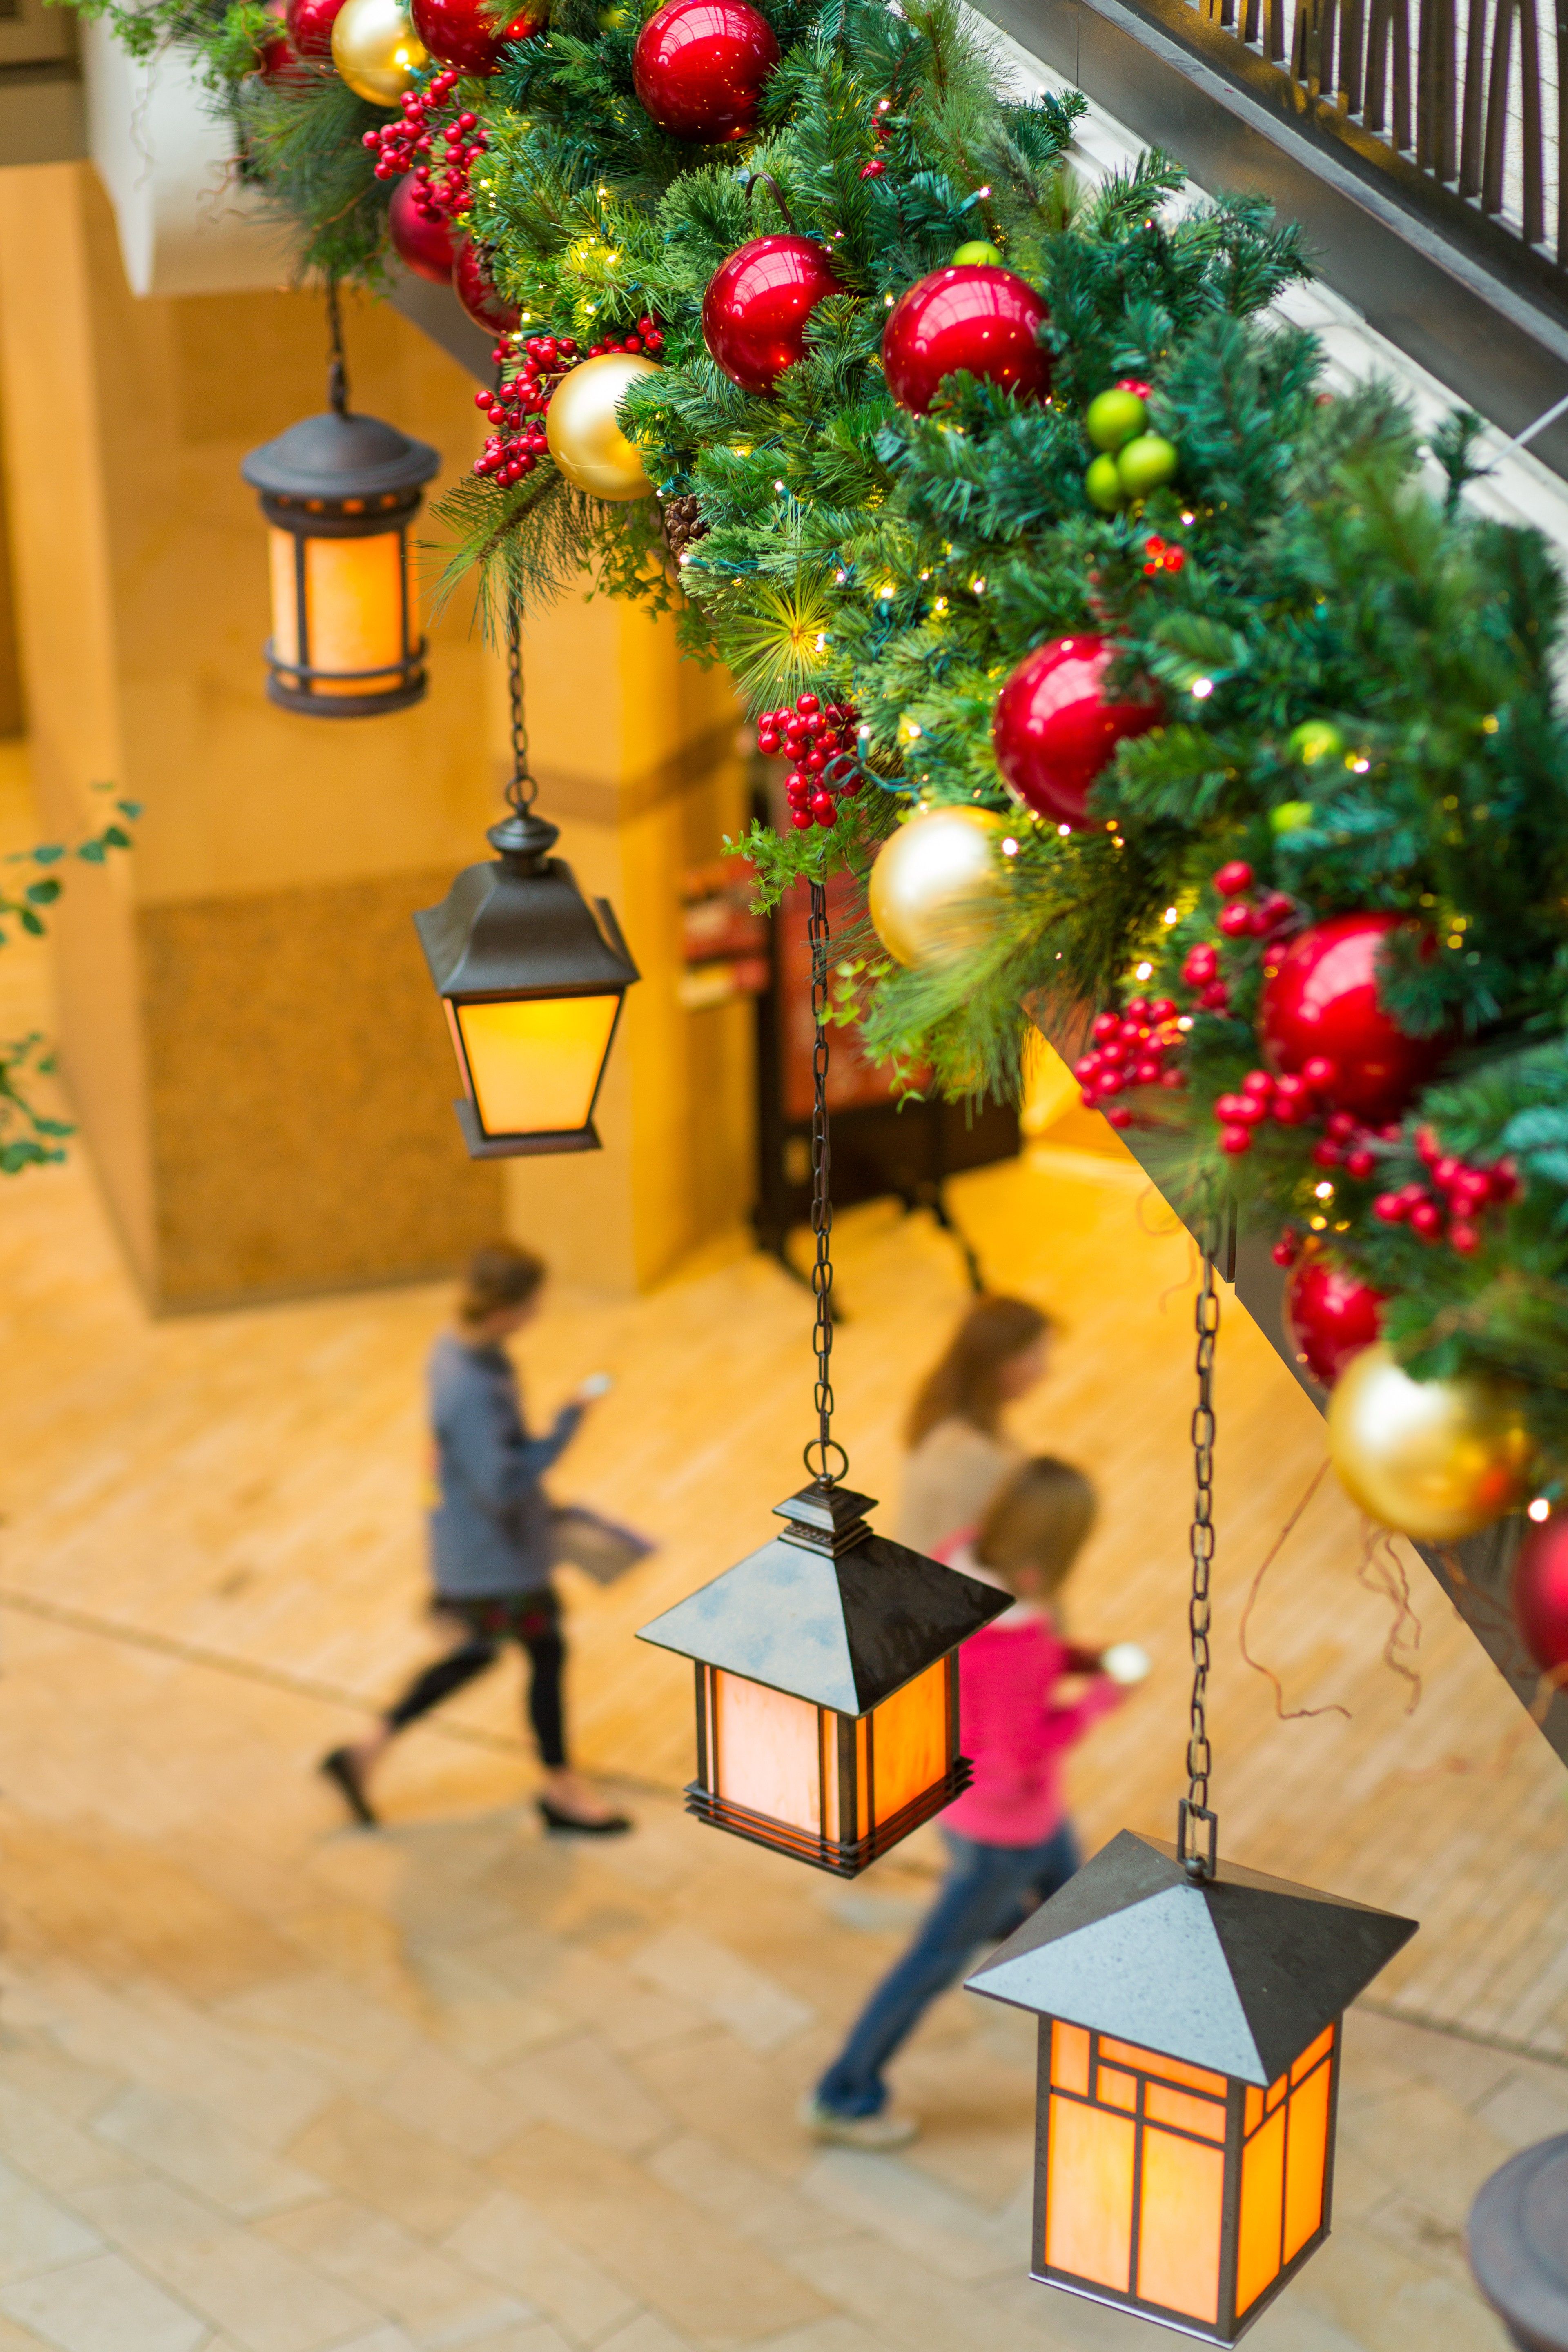 A row of lanterns and a pine bough hang over a walkway in a shopping mall.